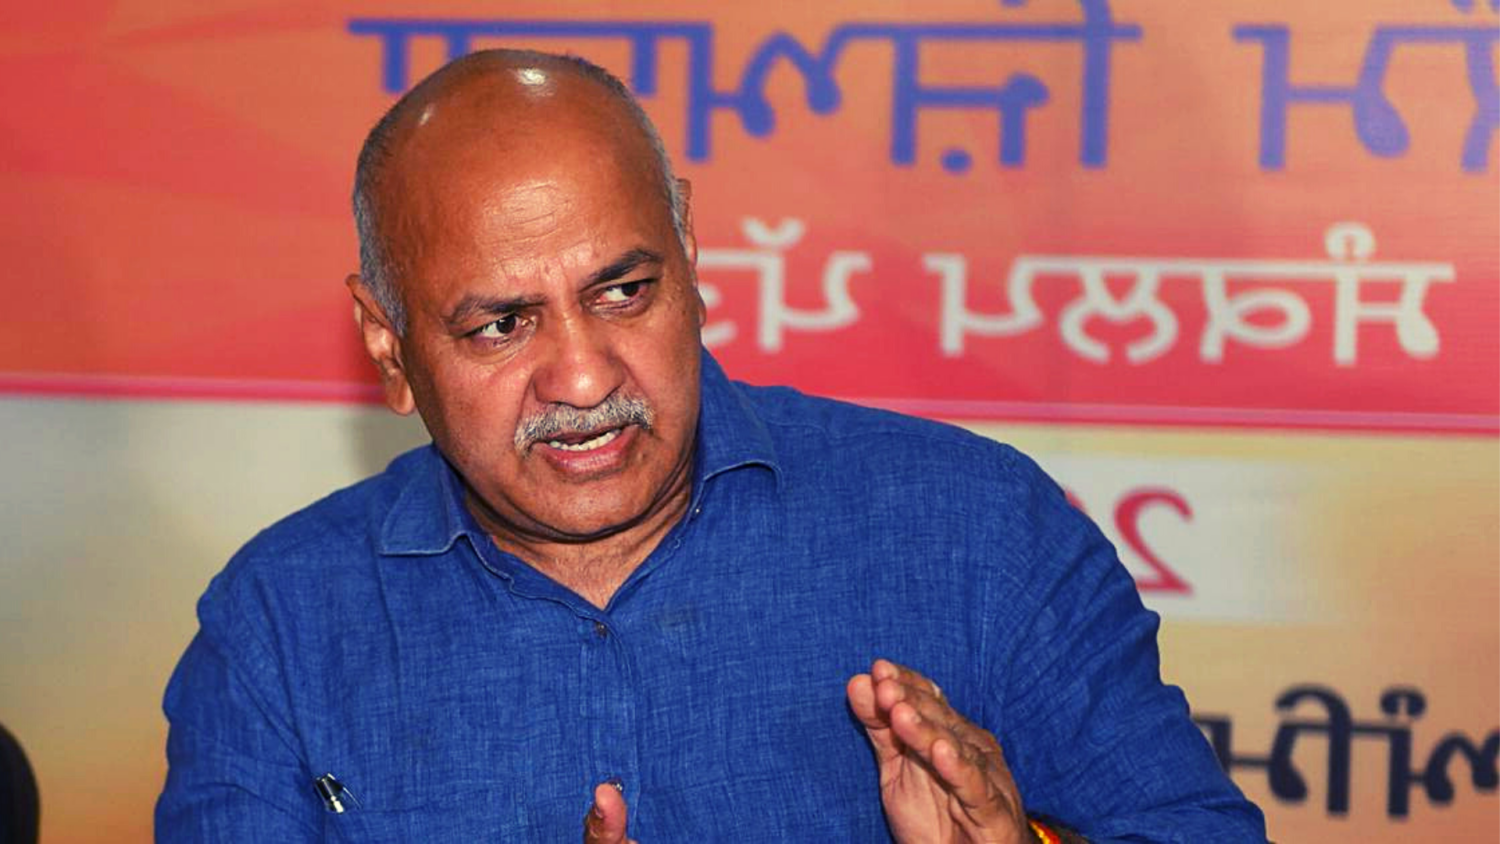 All your raids have failed, nothing was found: Sisodia amid excise policy case